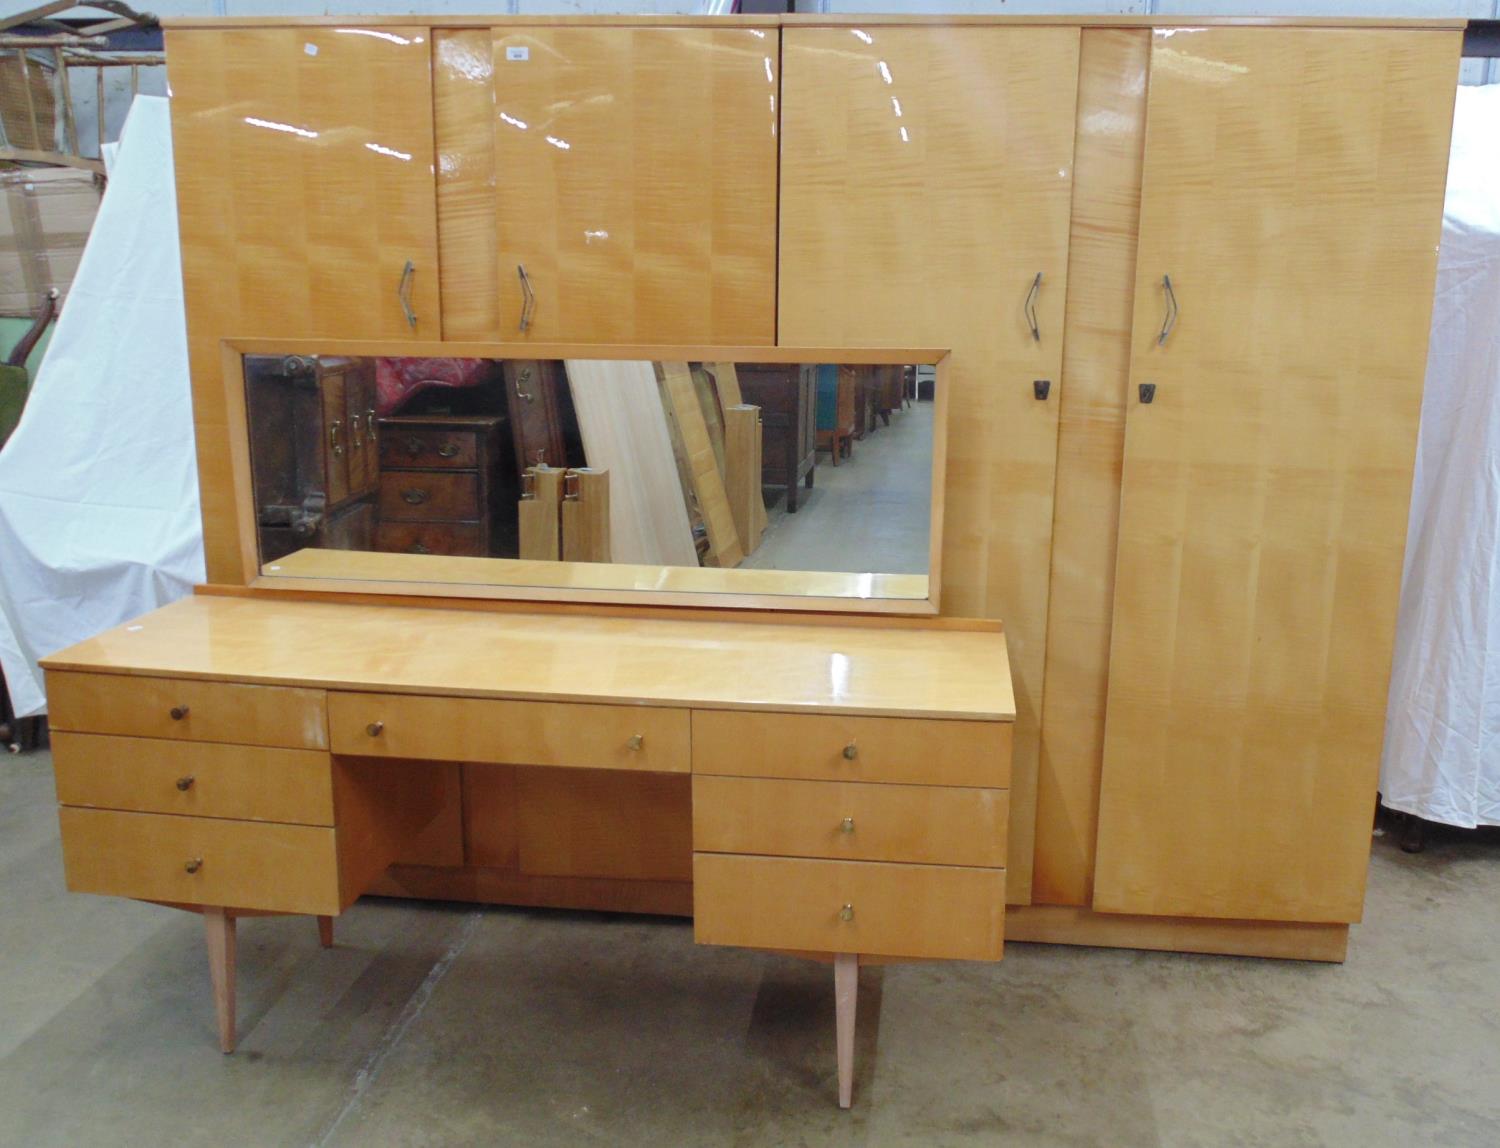 Mid century gloss maple finish three piece bedroom suite to comprise: one double wardrobe with doors